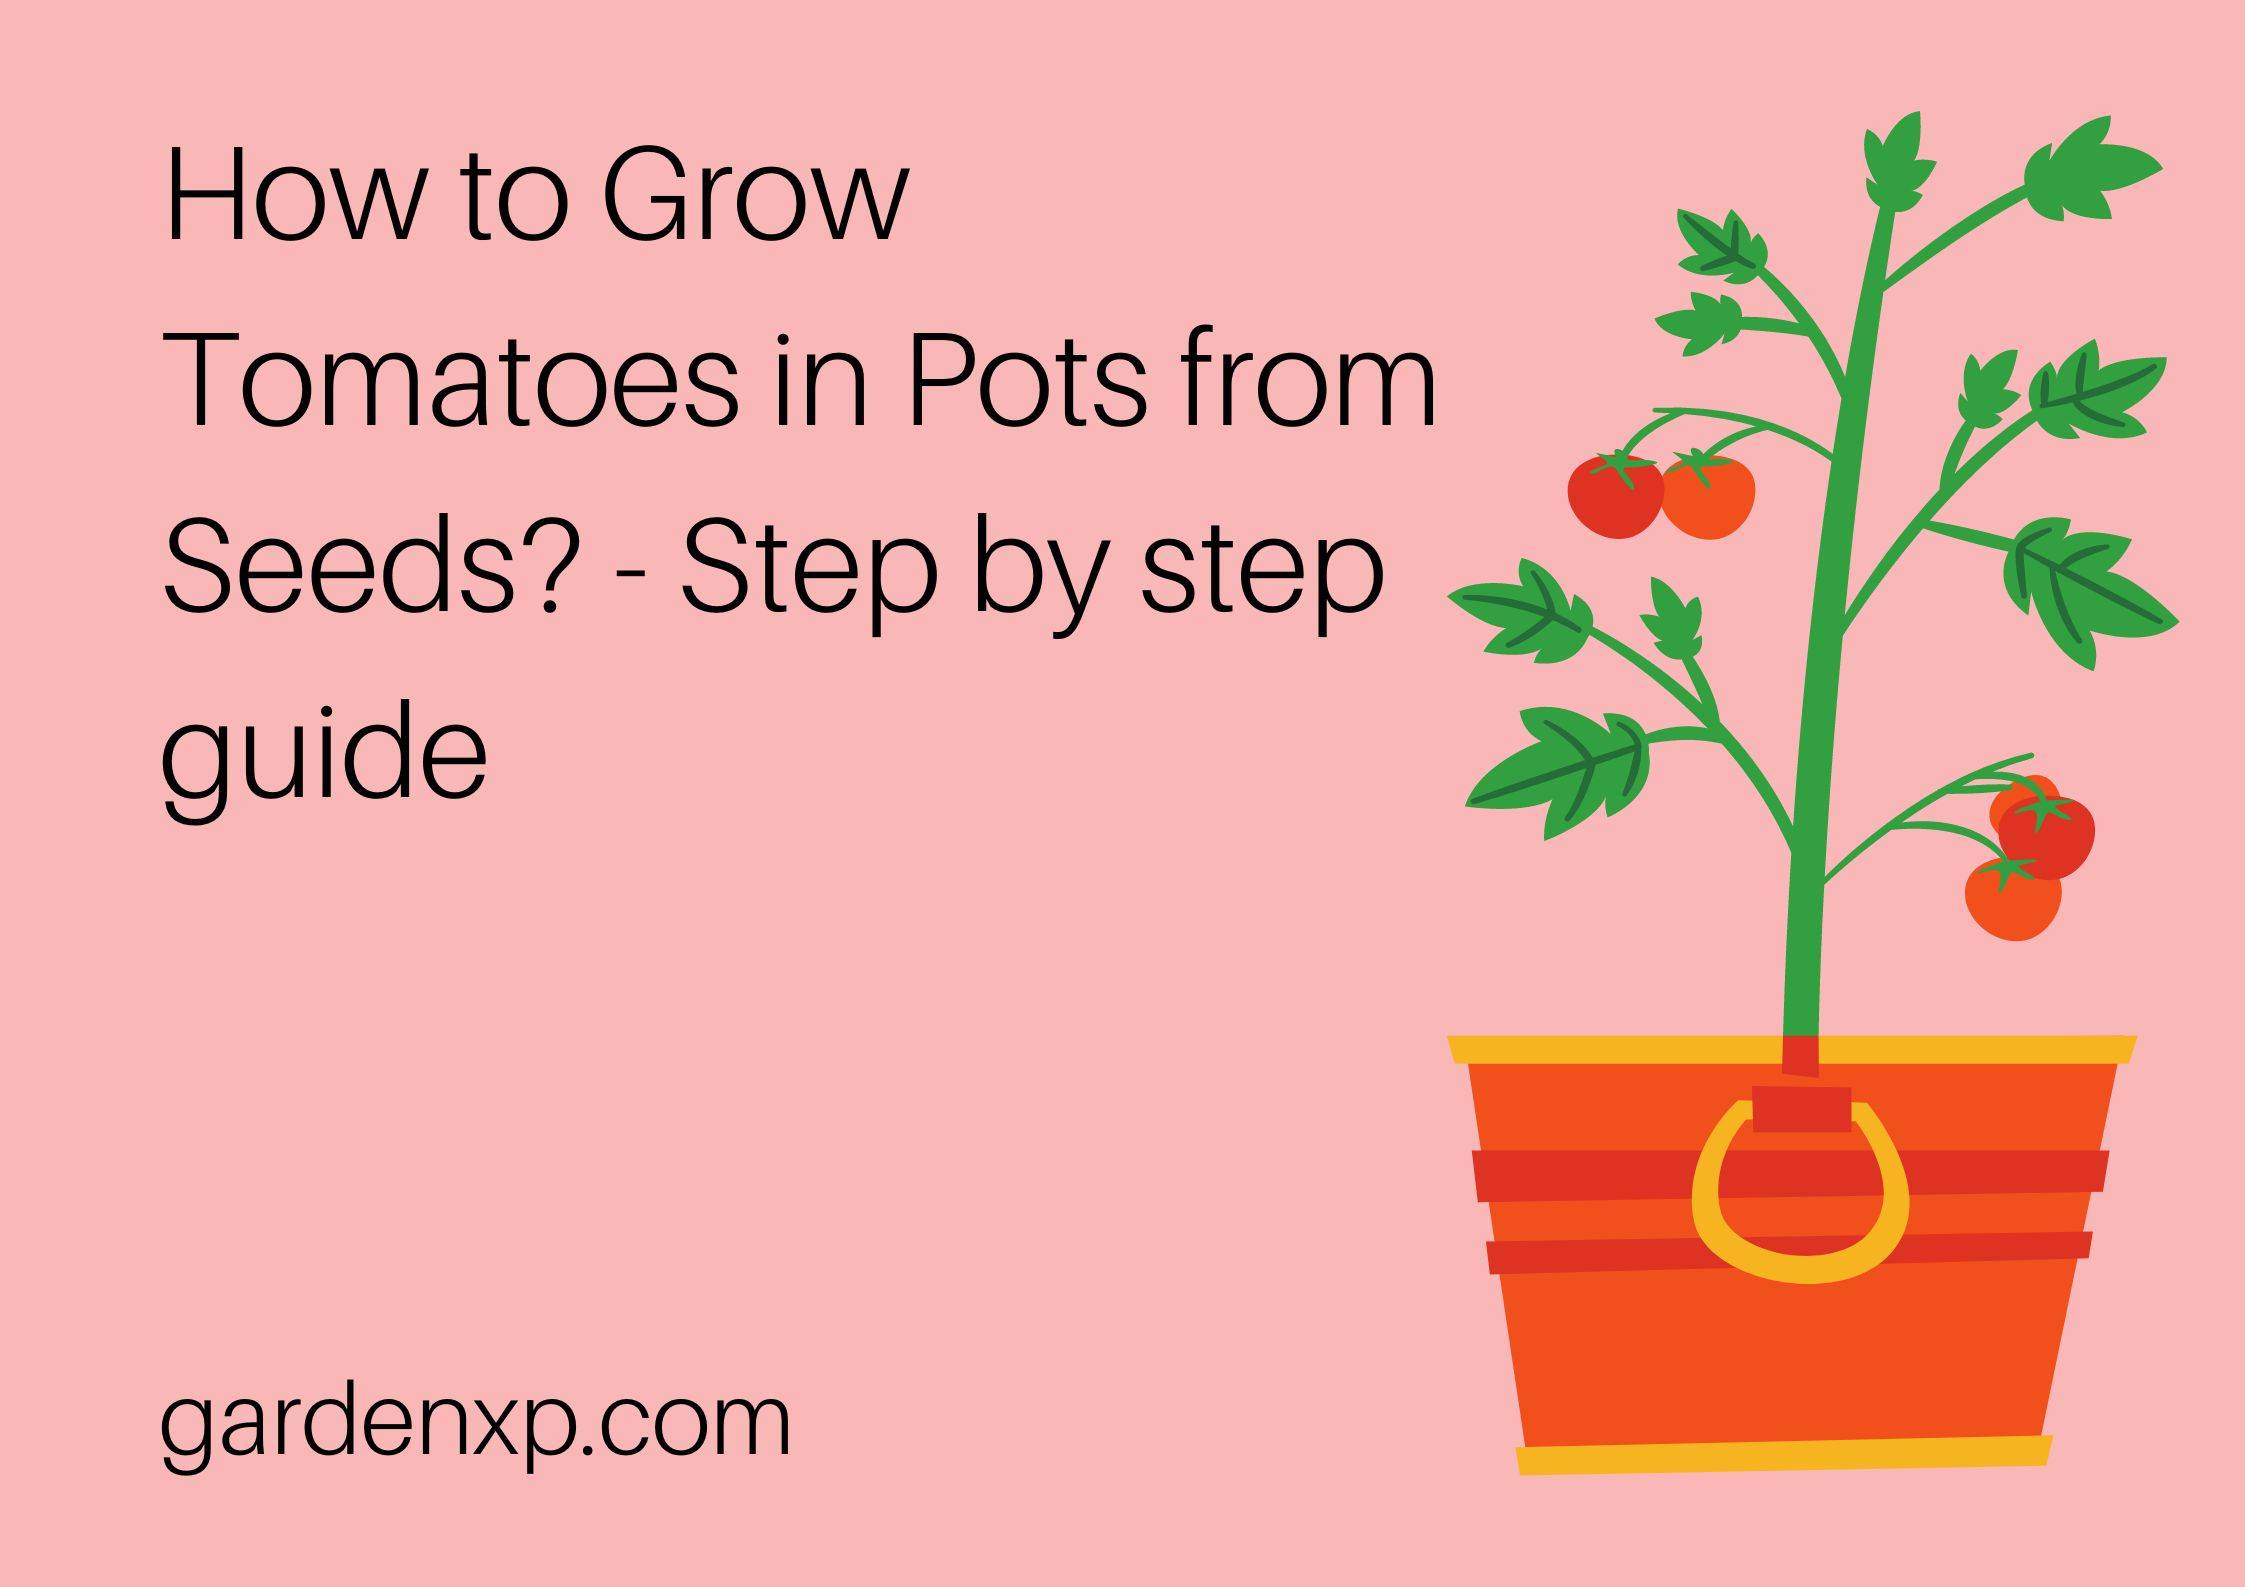 How to Grow Tomatoes in Pots from Seeds? - Step by step guide